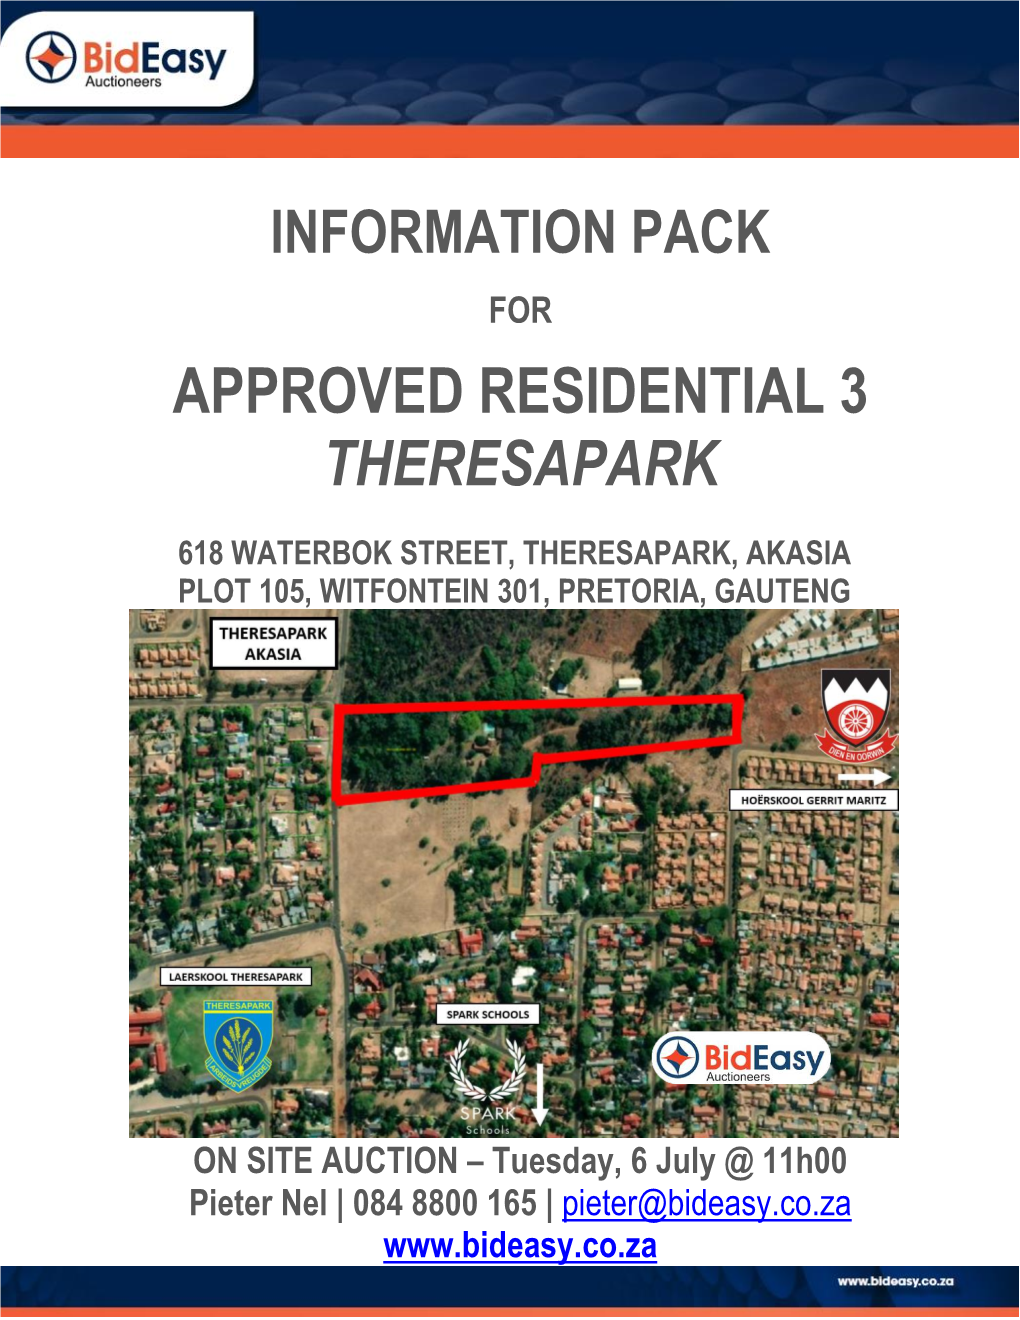 Approved Residential 3 Theresapark